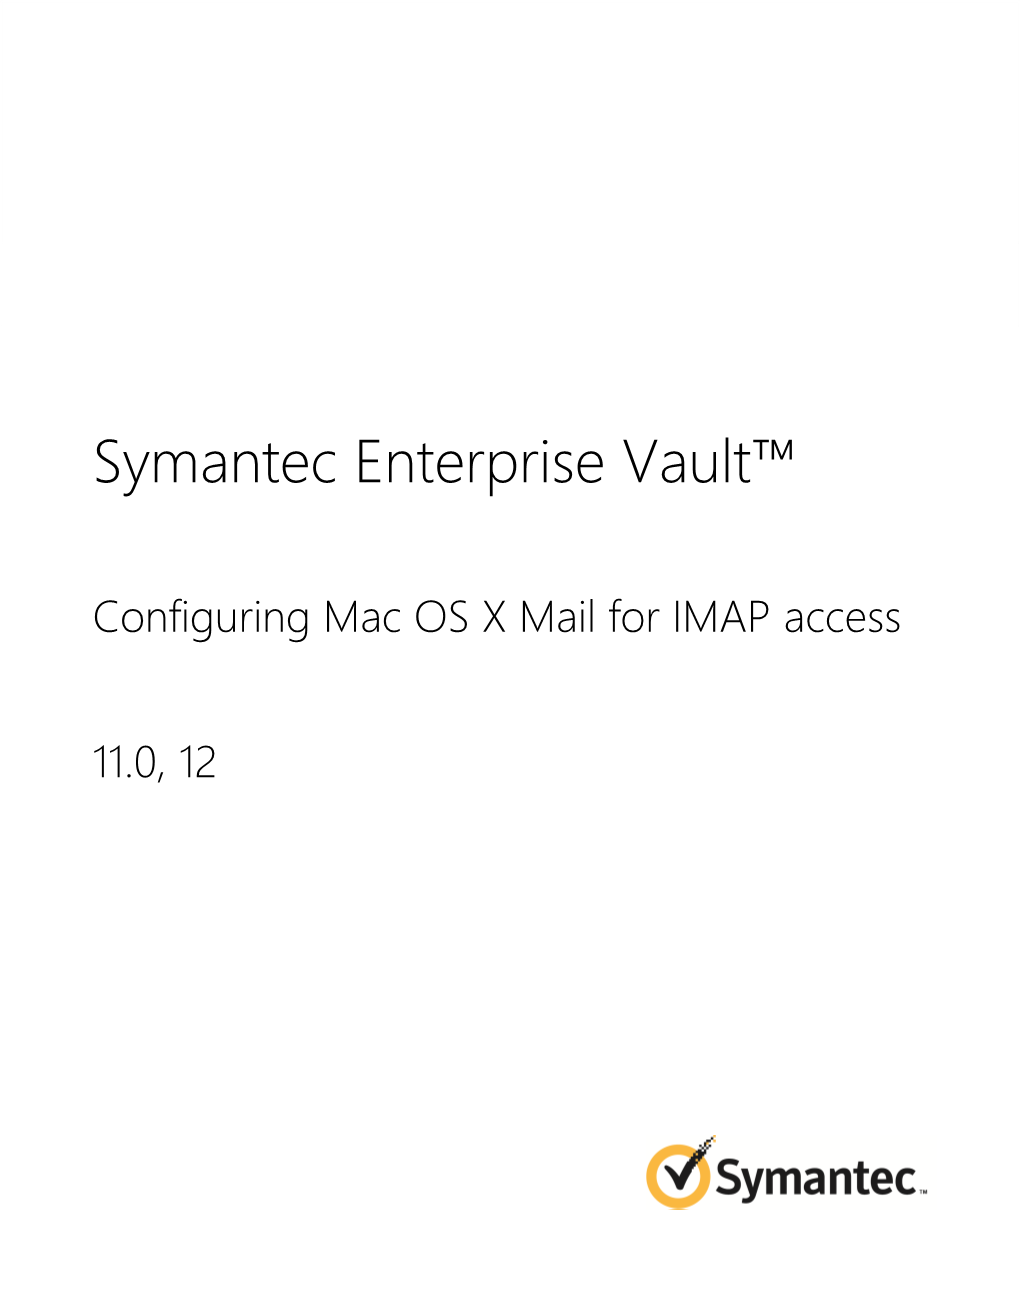 Configuring Mac OS X Mail for IMAP Access